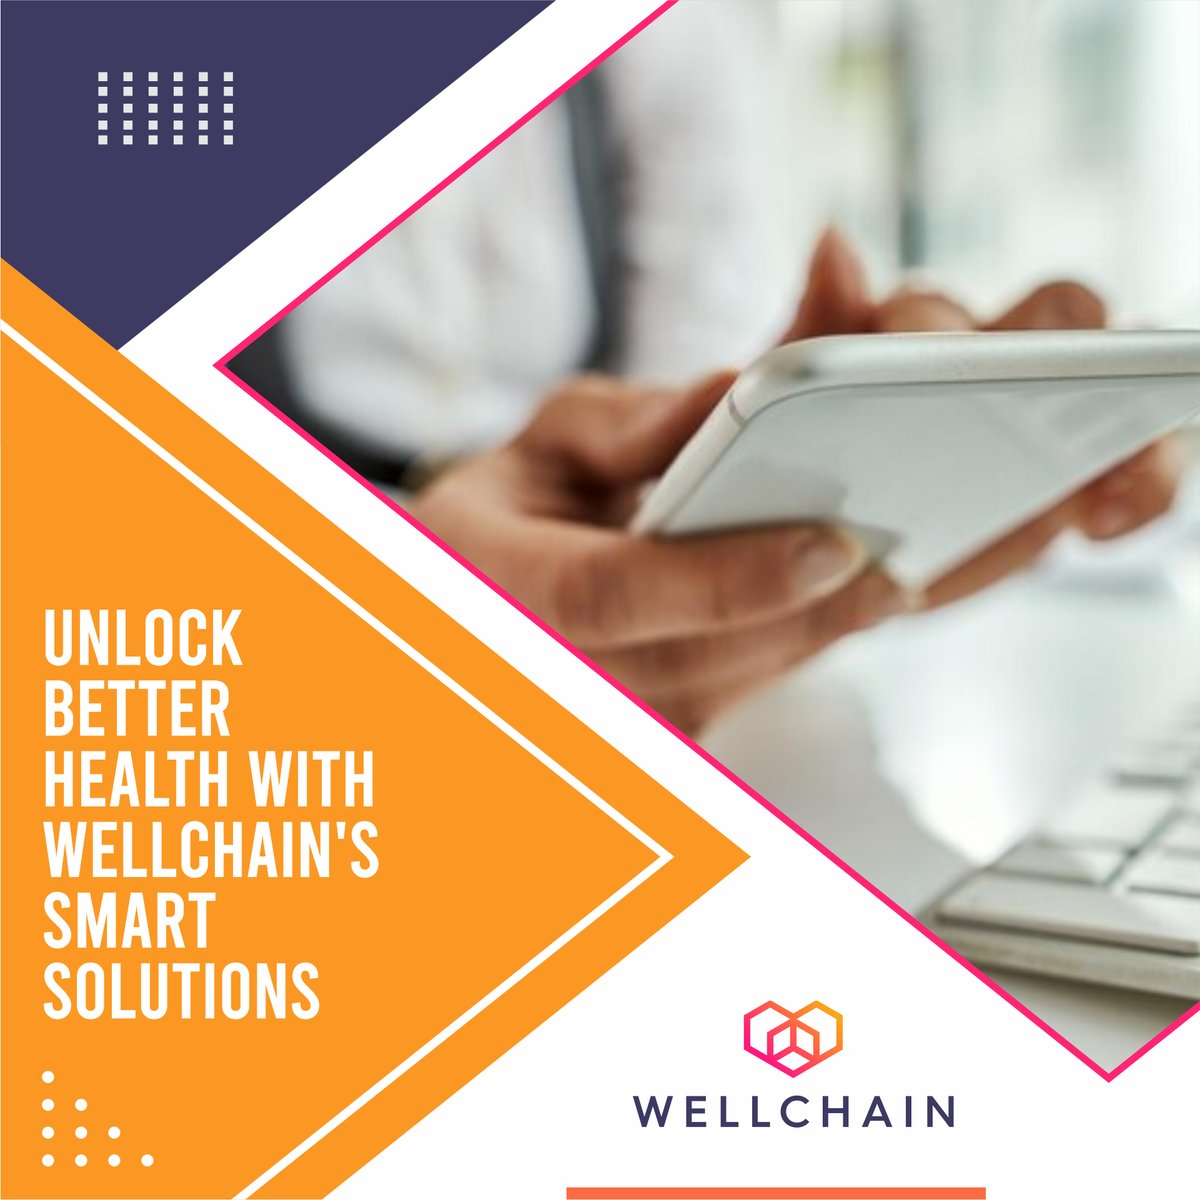 Wellchain is revolutionizing the way you approach health. Join us in the future of personalized and intelligent healthcare. Your wellness journey starts here!
.
.
.
.
#WellchainRevolution
#PersonalizedHealthcare
#IntelligentWellness
#FutureofHealth
#WellnessJourney
#HealthTech